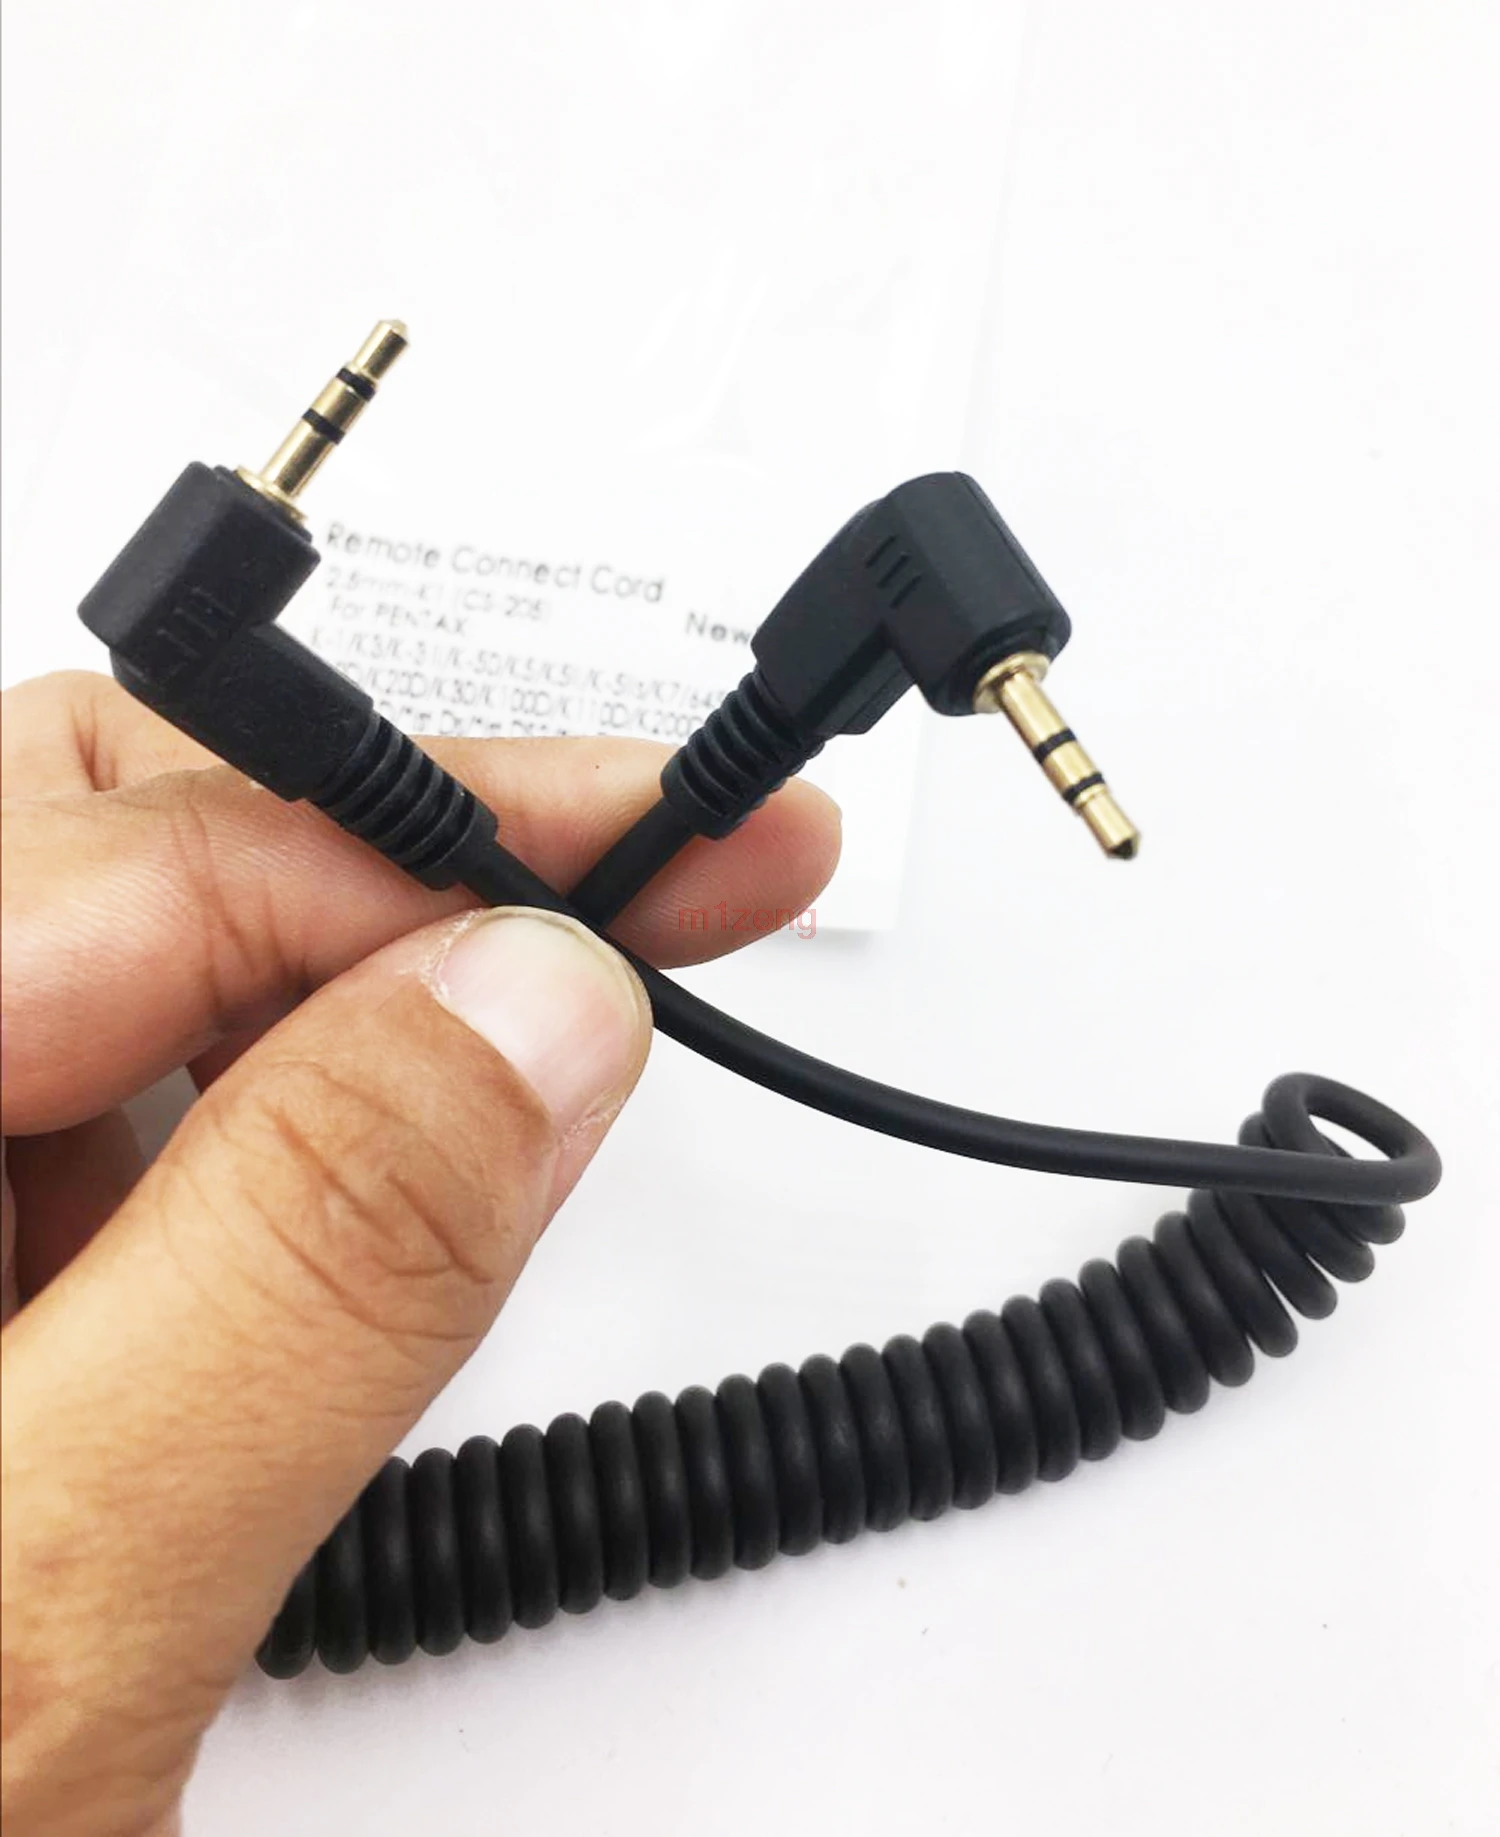 

2.5/3.5mm Shutter Release Connecting cable cord for Panasonic g1 g2 g3 g5 g6 g7 g10 gf1 gh1 gh2 gh4 gh5 gx7 gx8 camera